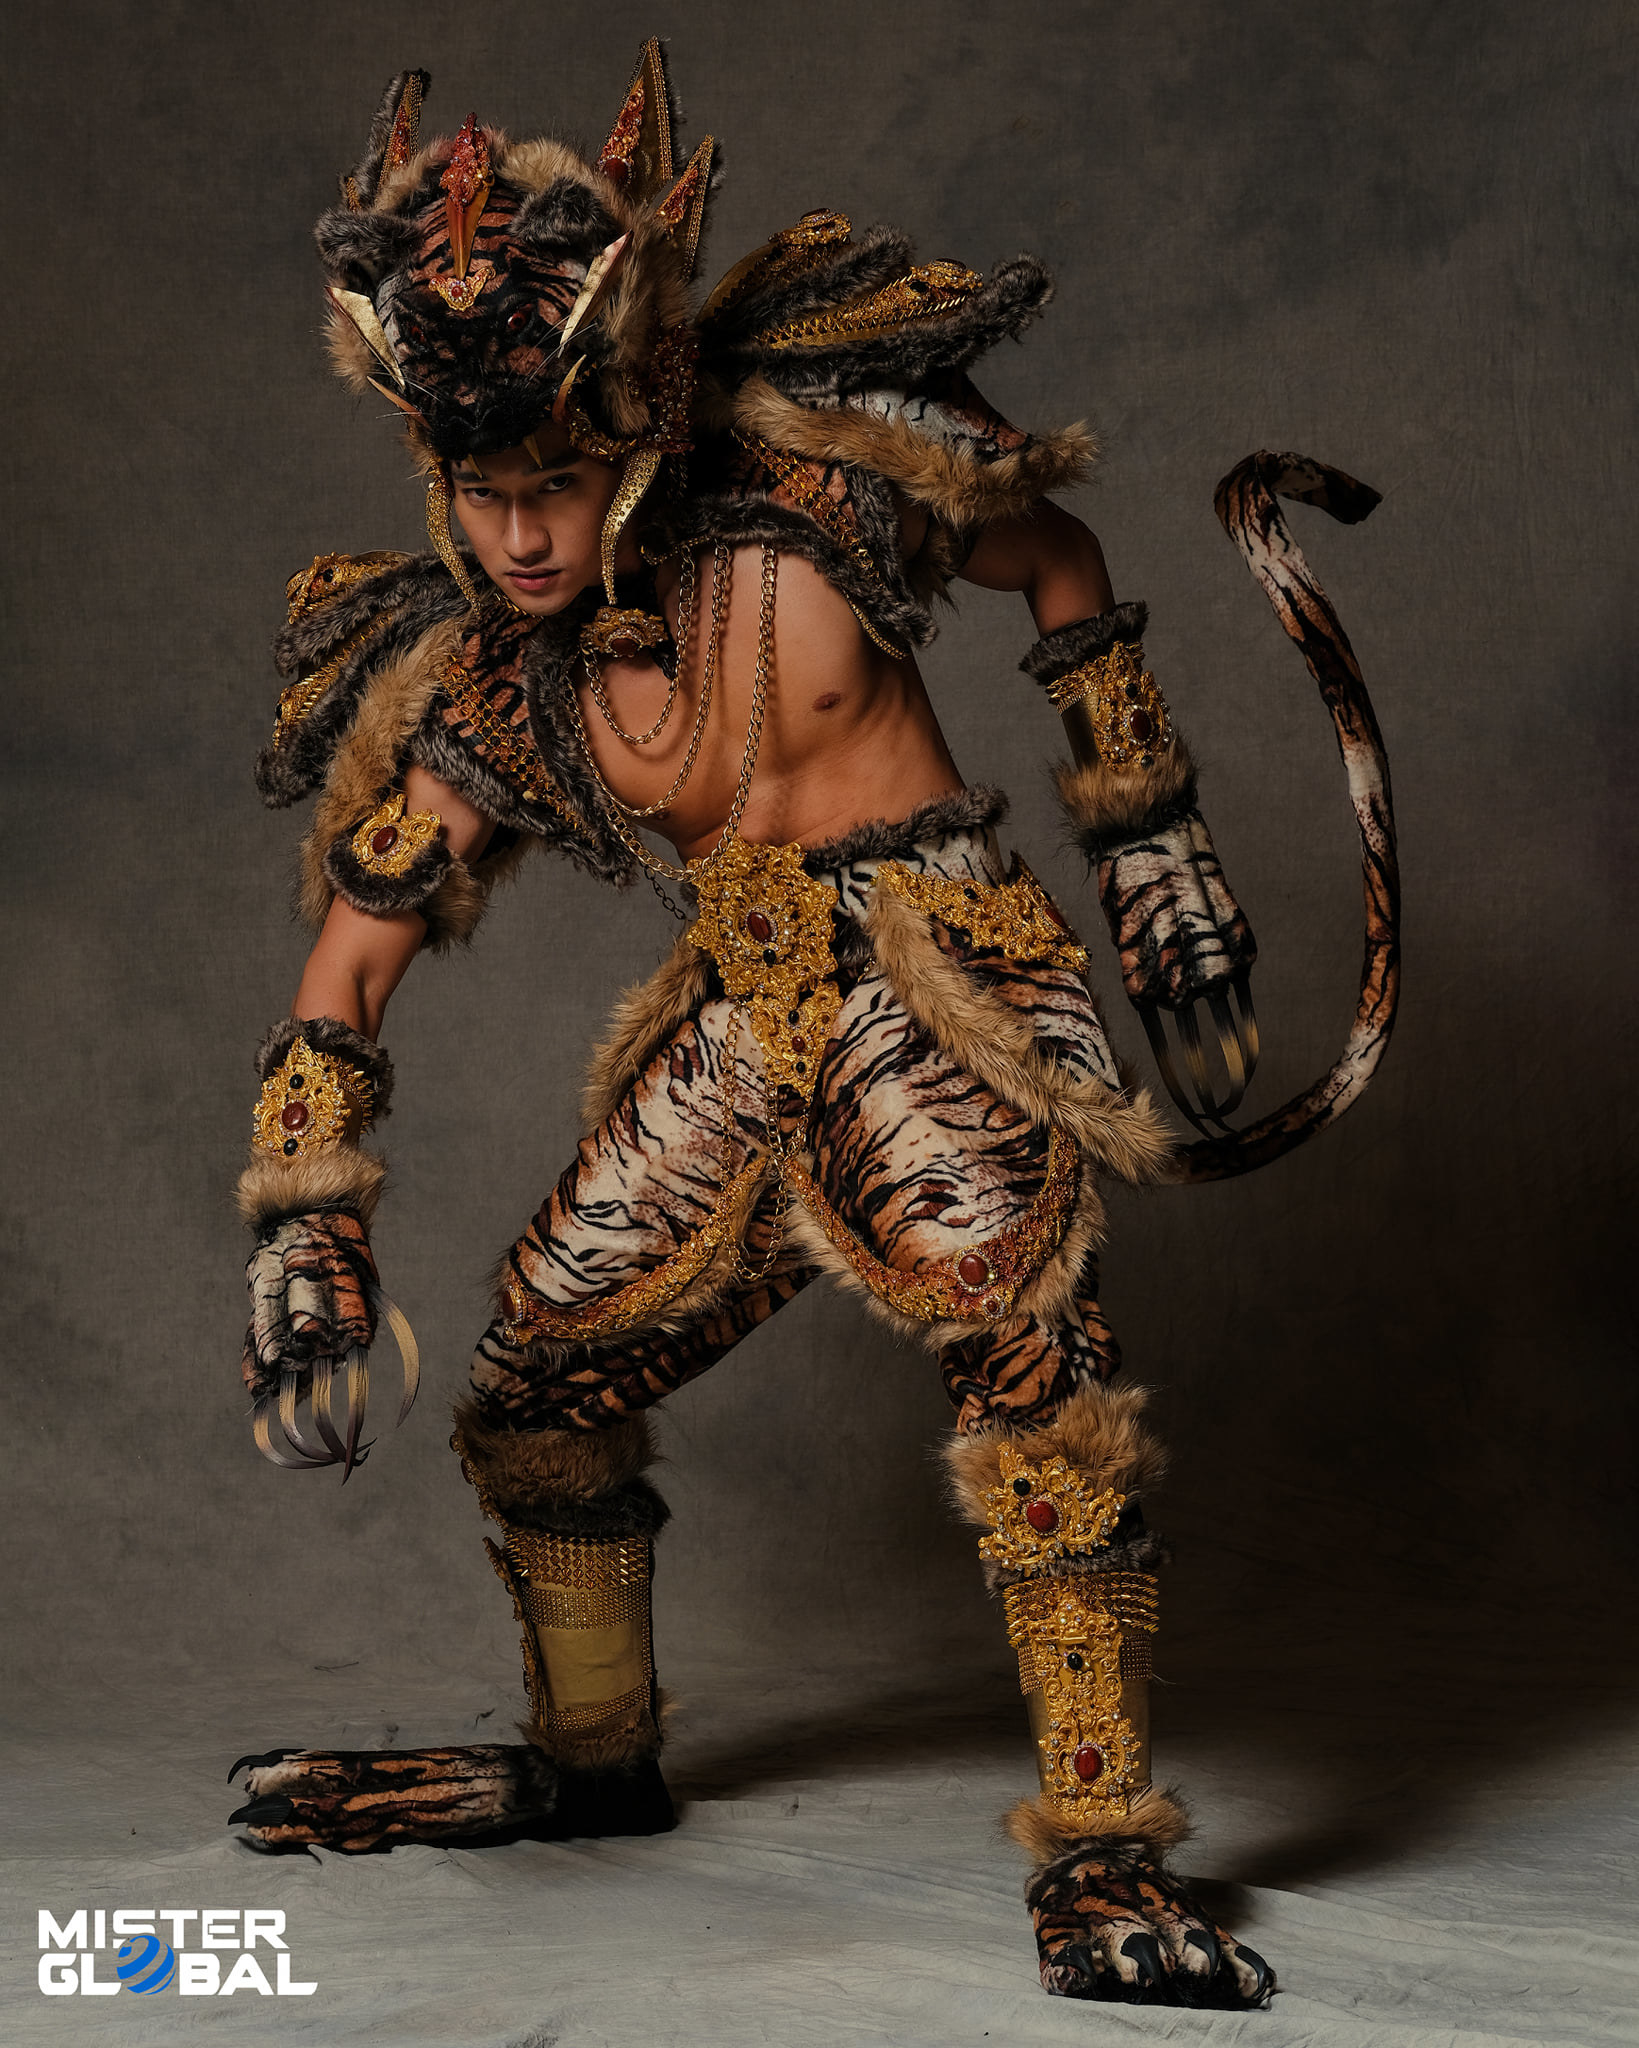 A bare-chested man wearing a dramatic headdress and an outfit with animal patterns and talons